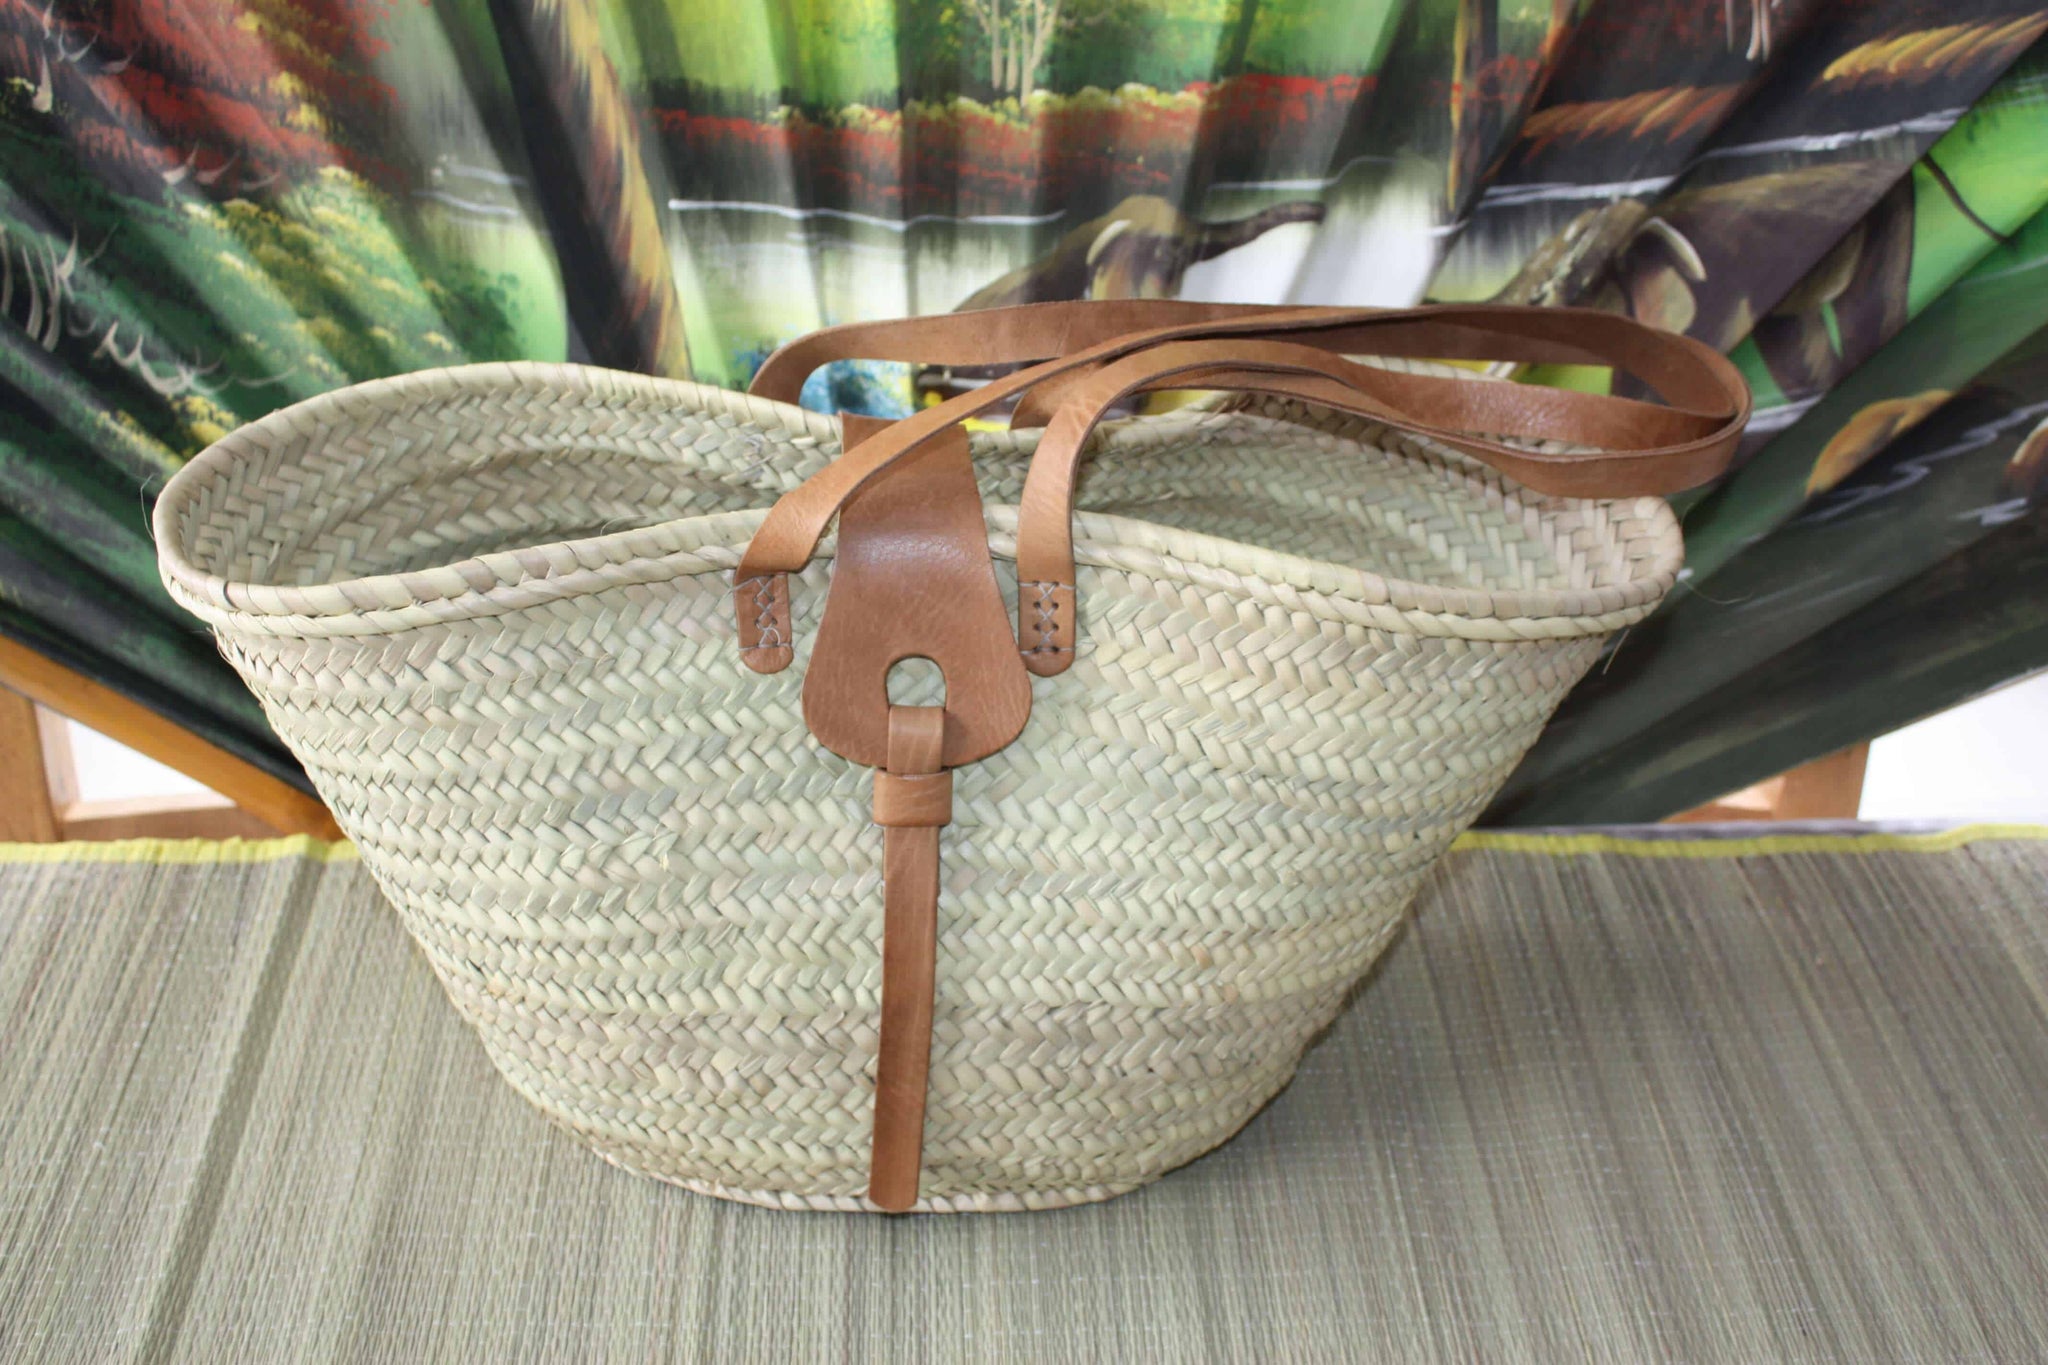 Superb Bag with Long Leather Handles - Tote bag Couffin markets race beach natural basket